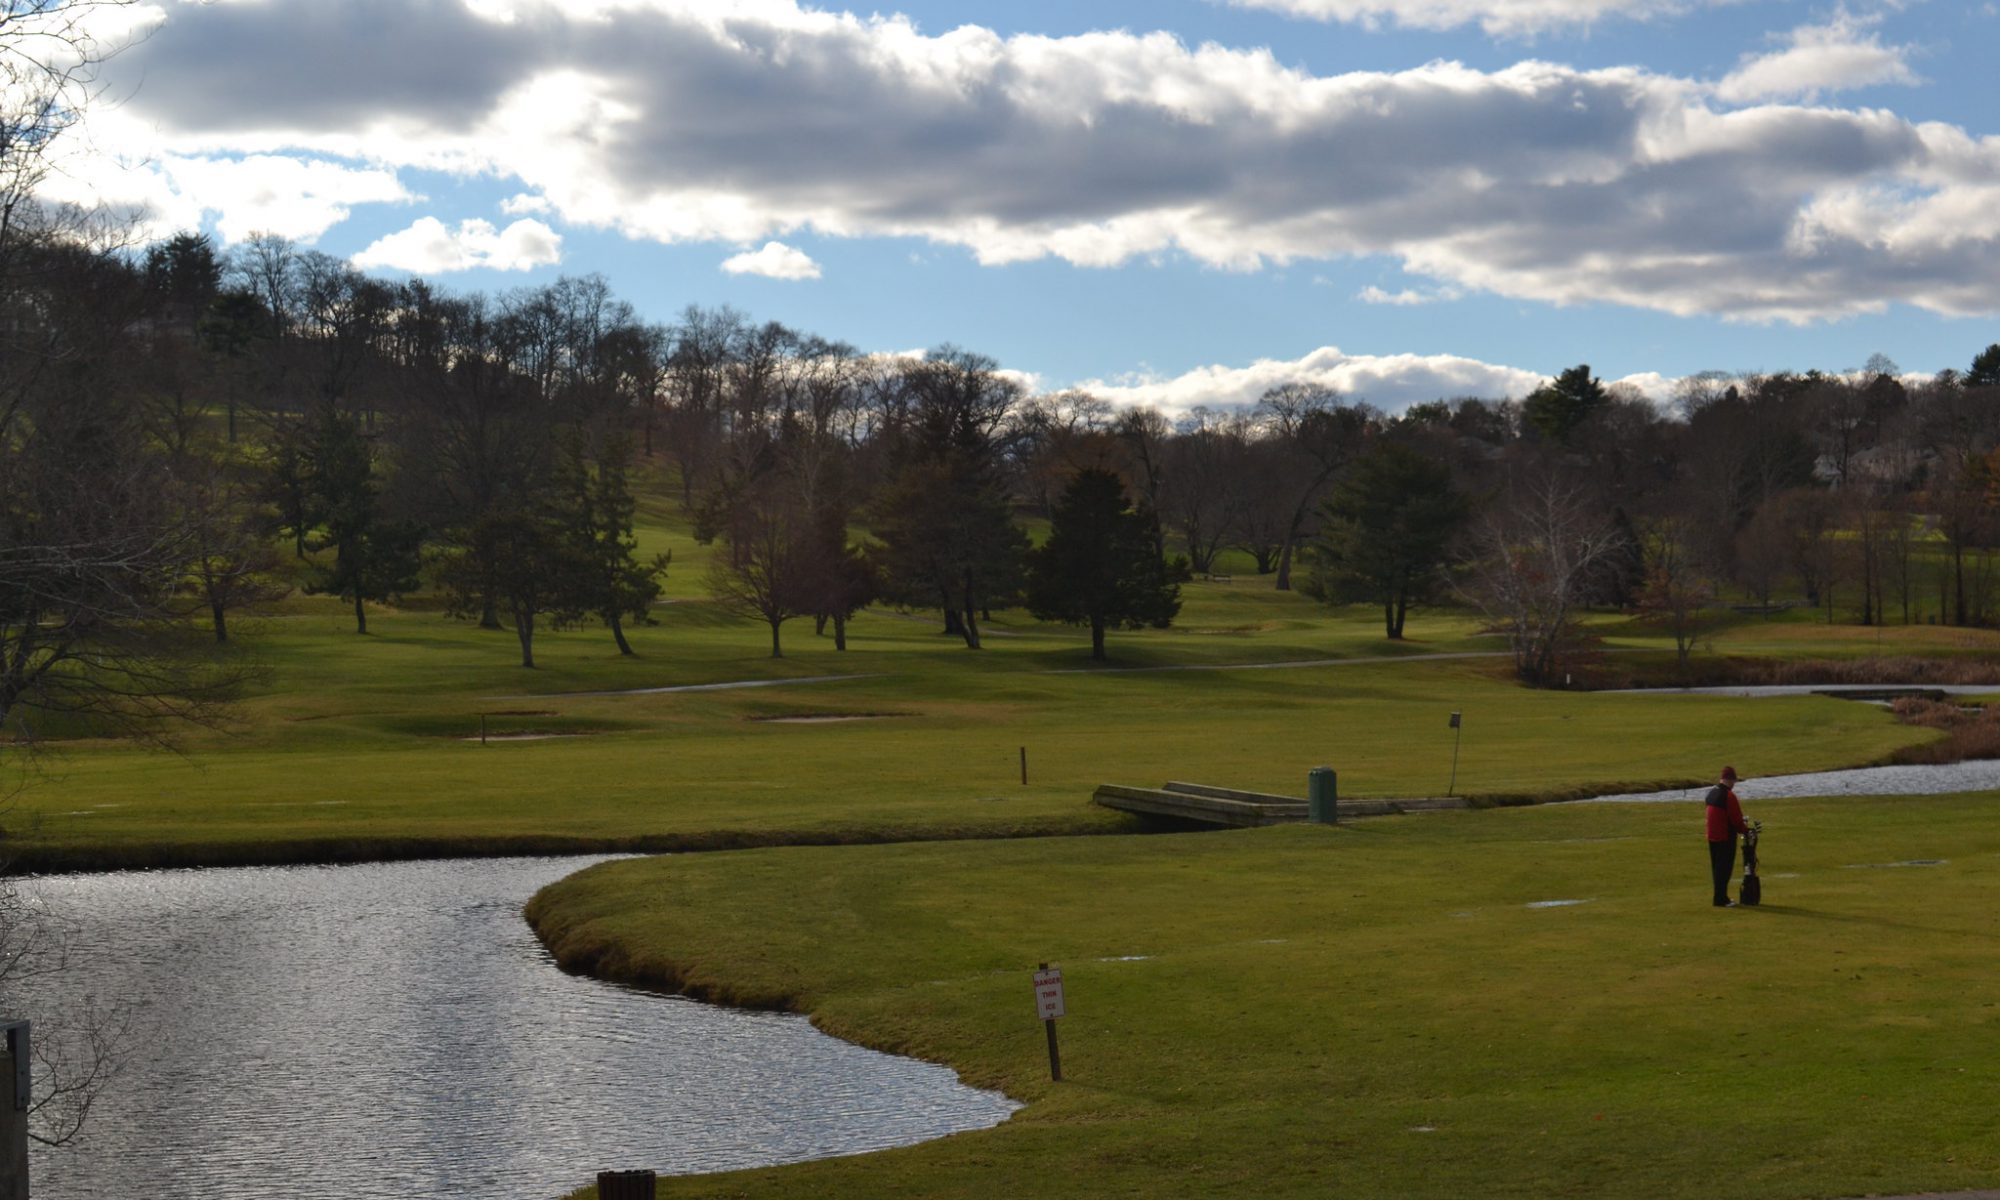 Photograph of a golf course showing a pond in the foreground, a distant person with a bag of clubs, and trees in the background